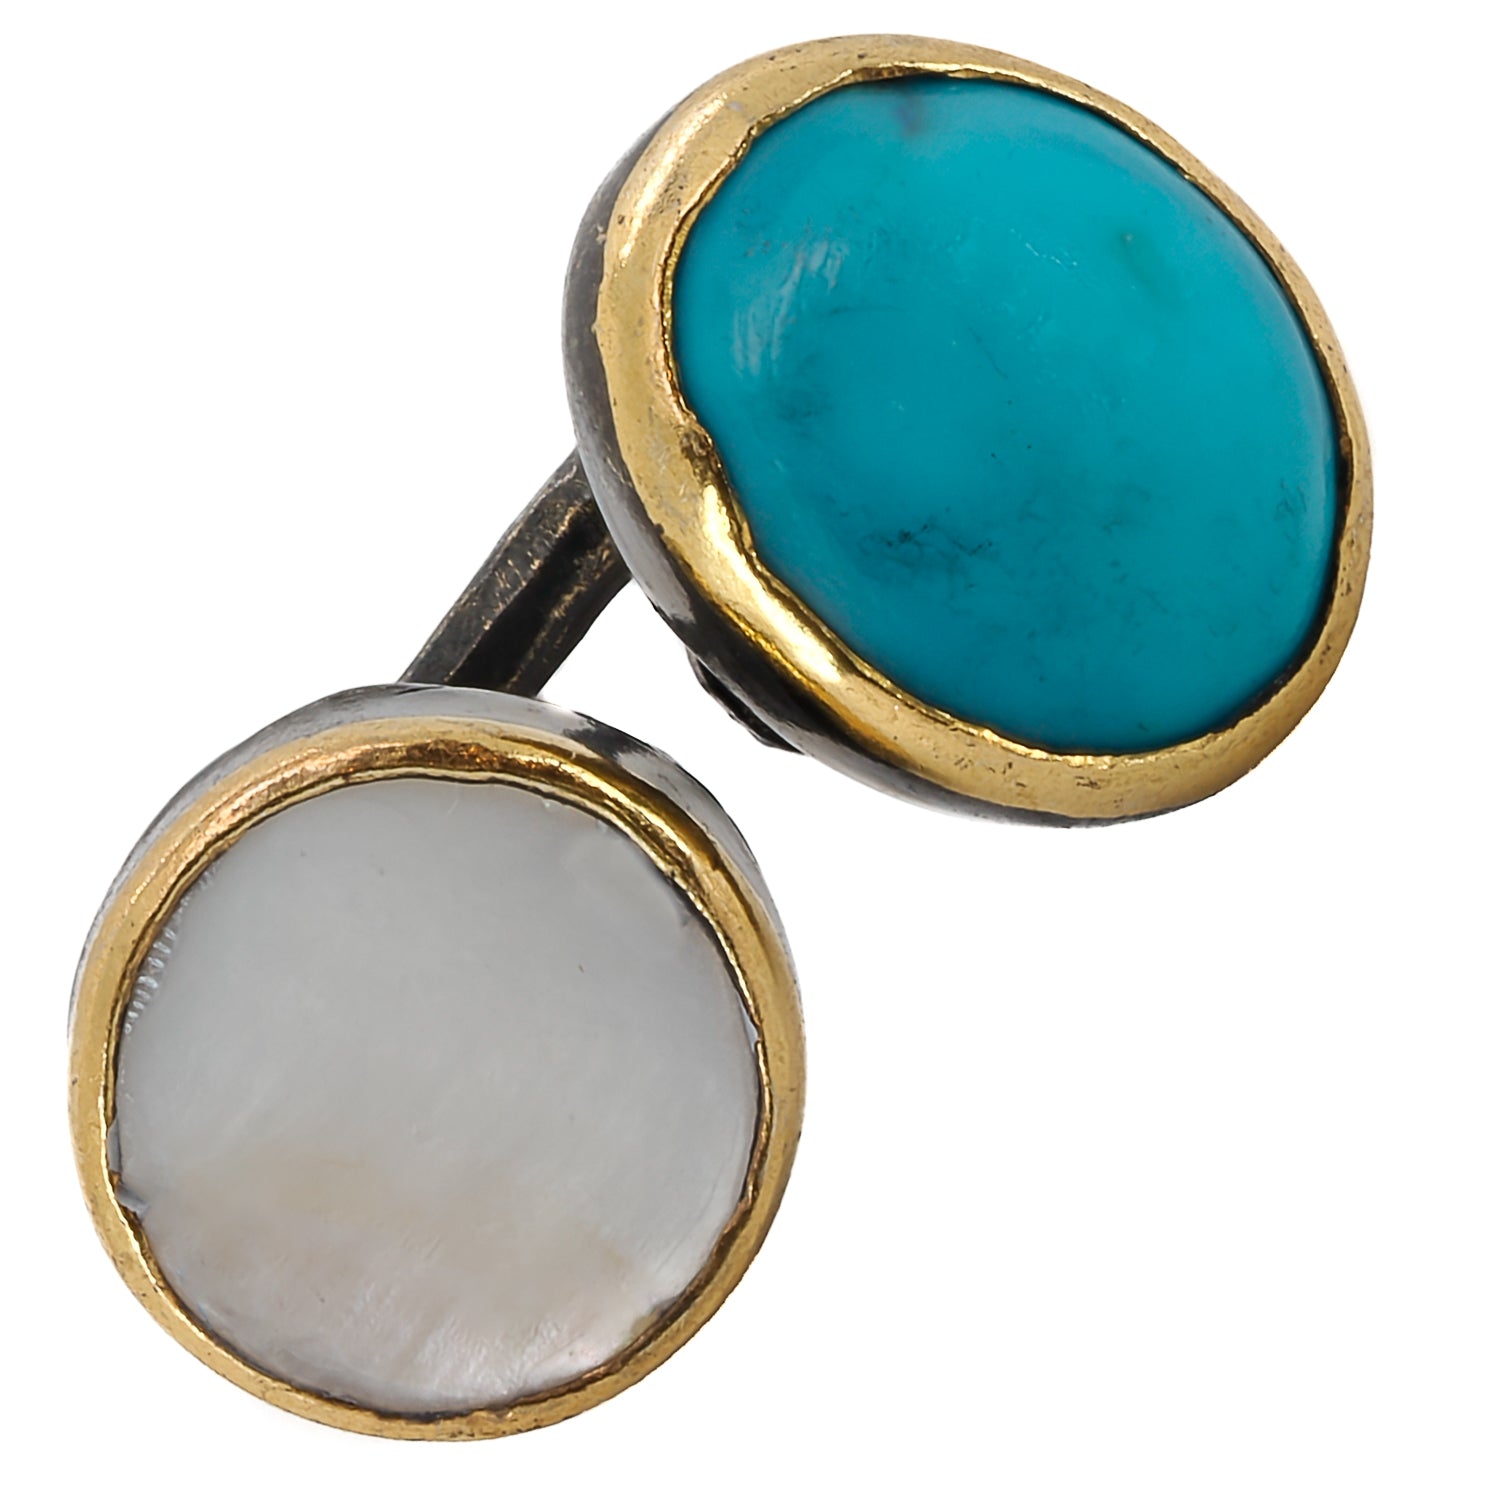 Discover the wisdom of the Pearl and tranquility of the Turquoise in this stunning ring.